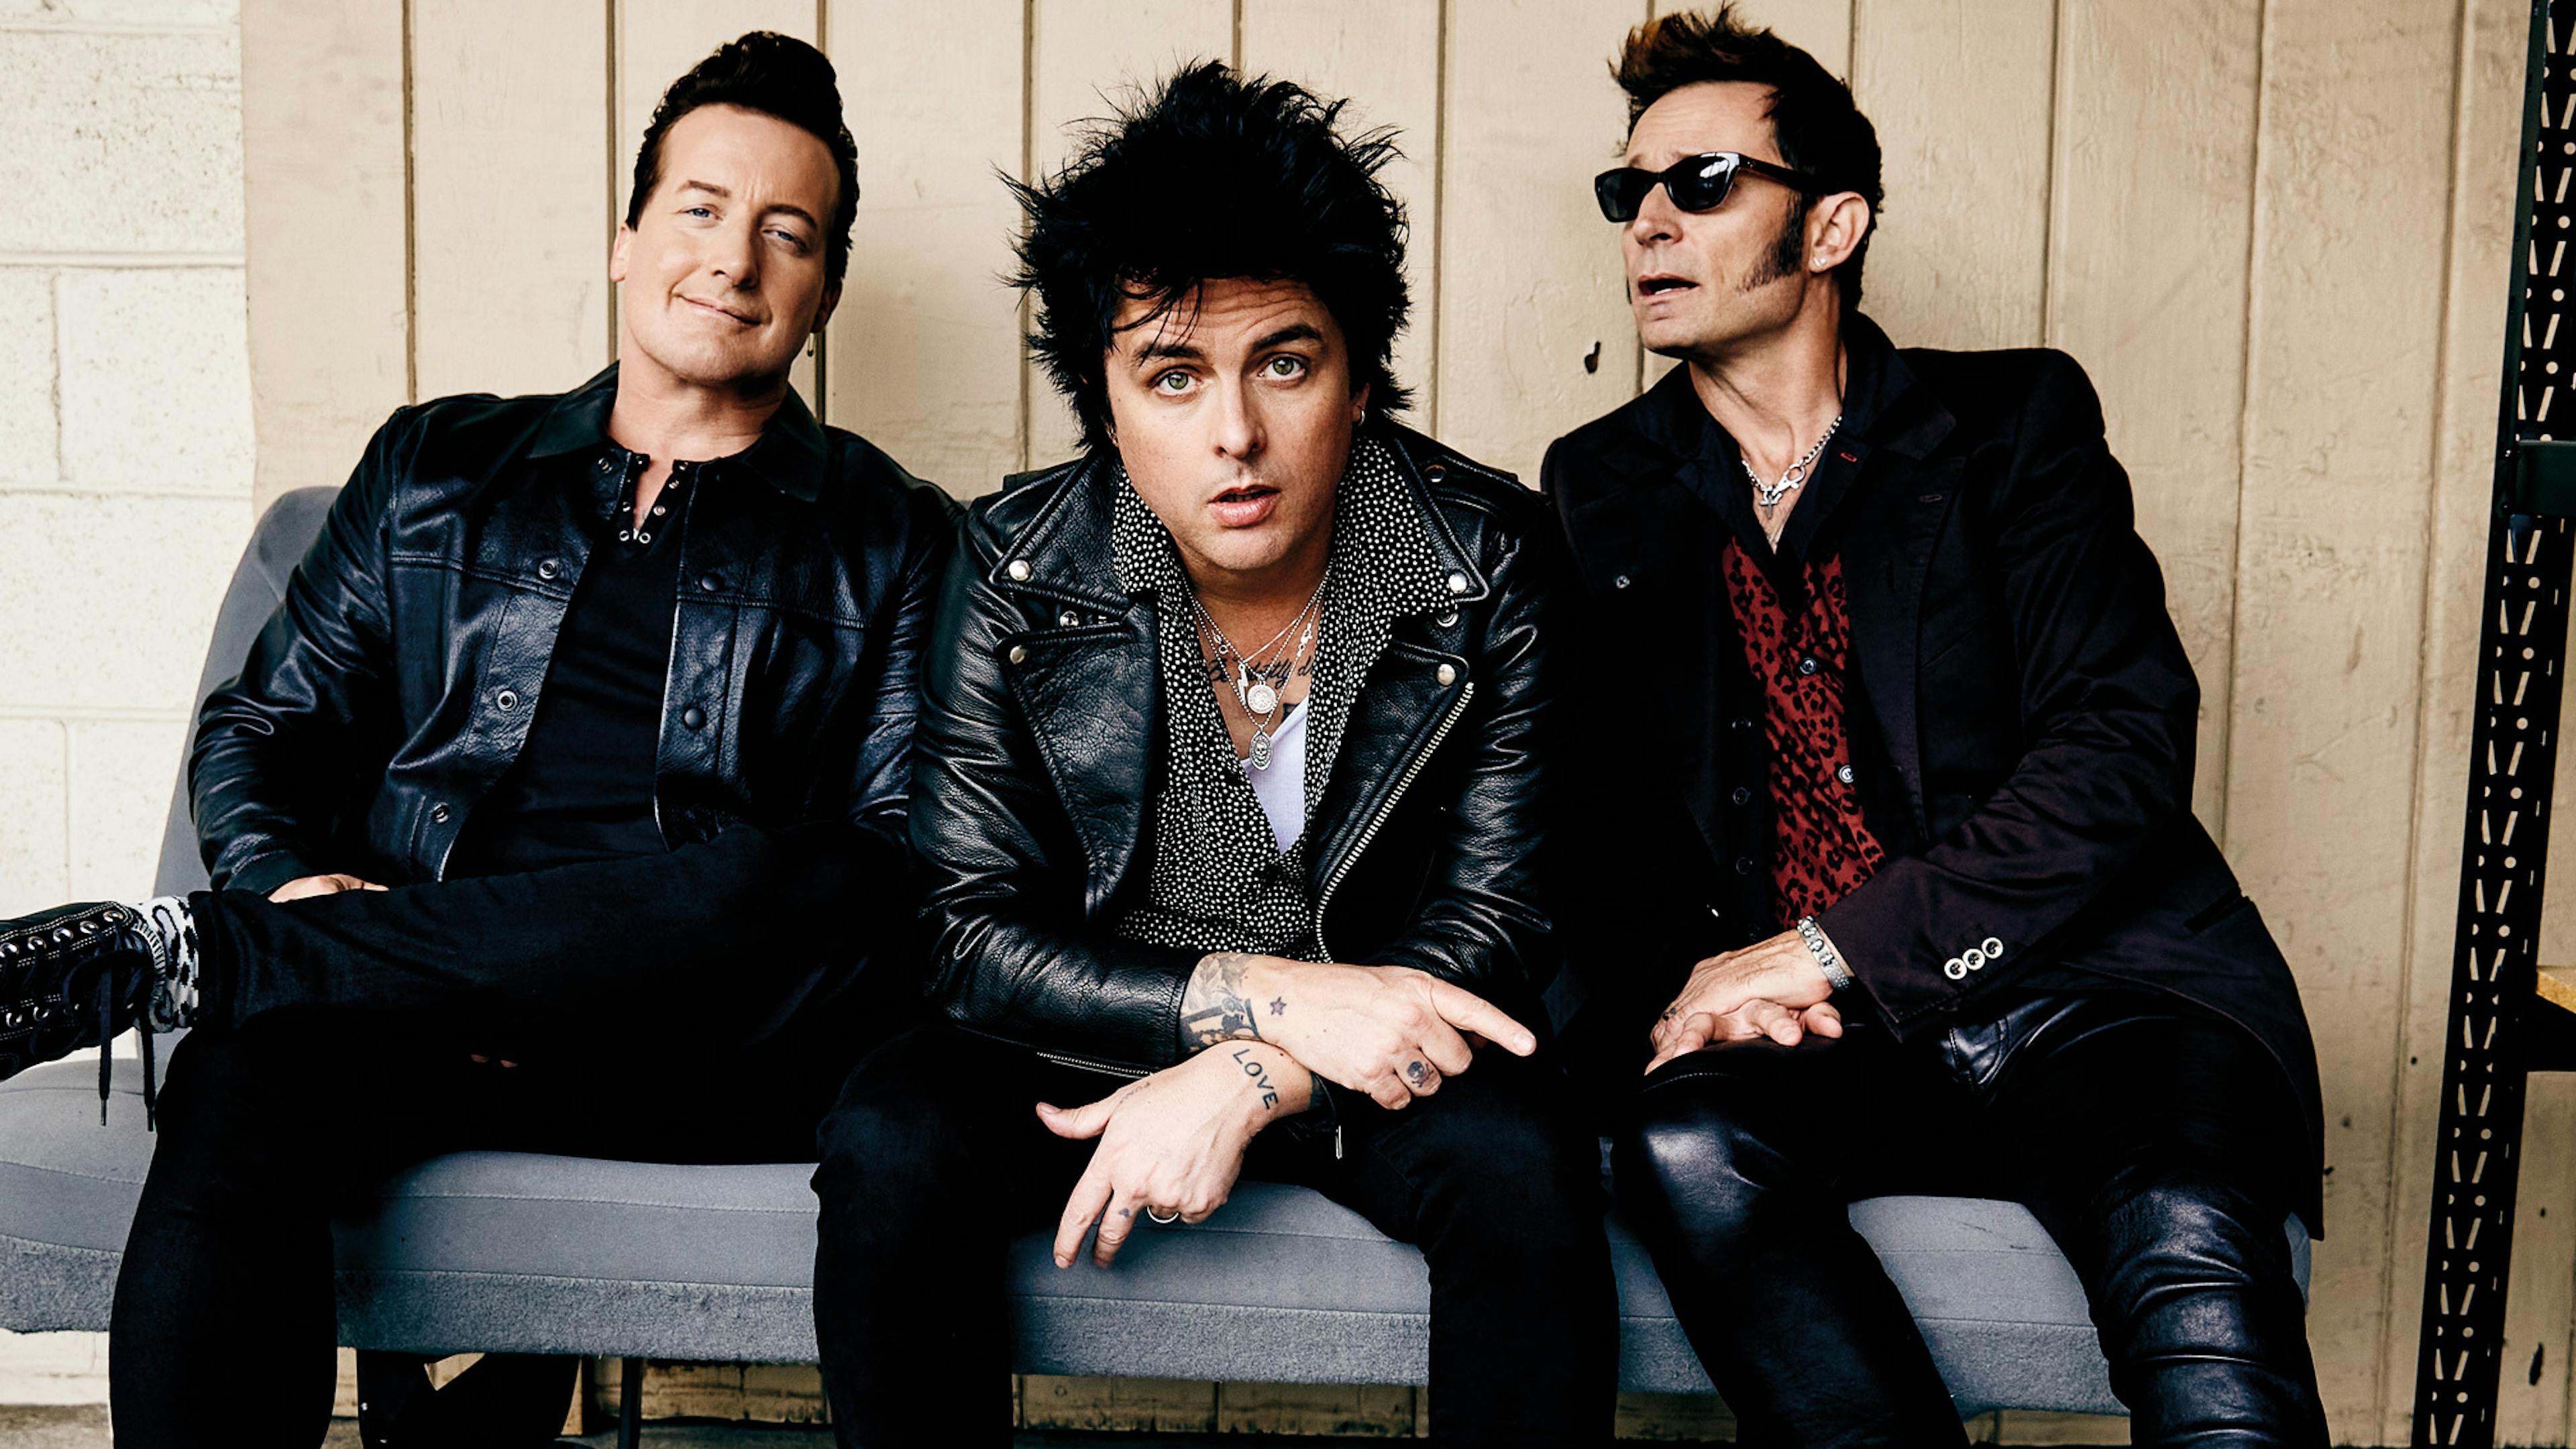 Billie Joe Armstrong reveals the song Serena Williams always requests Green Day play live